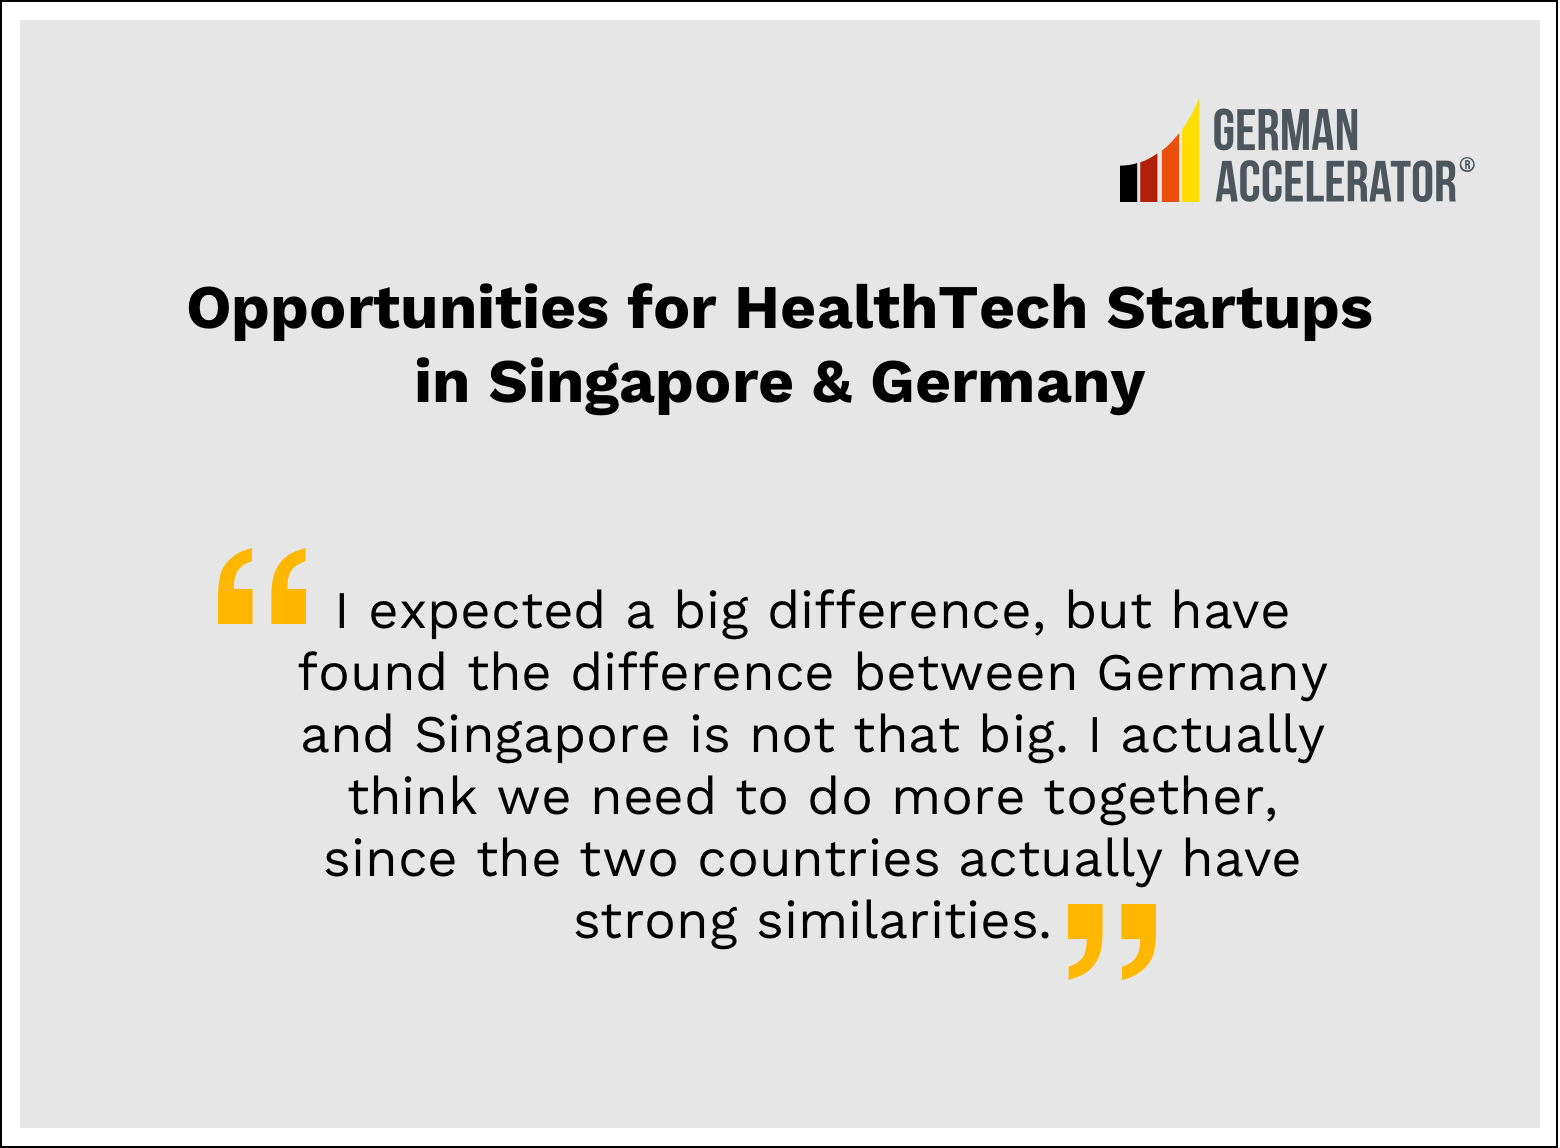 Opportunities for HealthTech Startups in Singapore & Germany